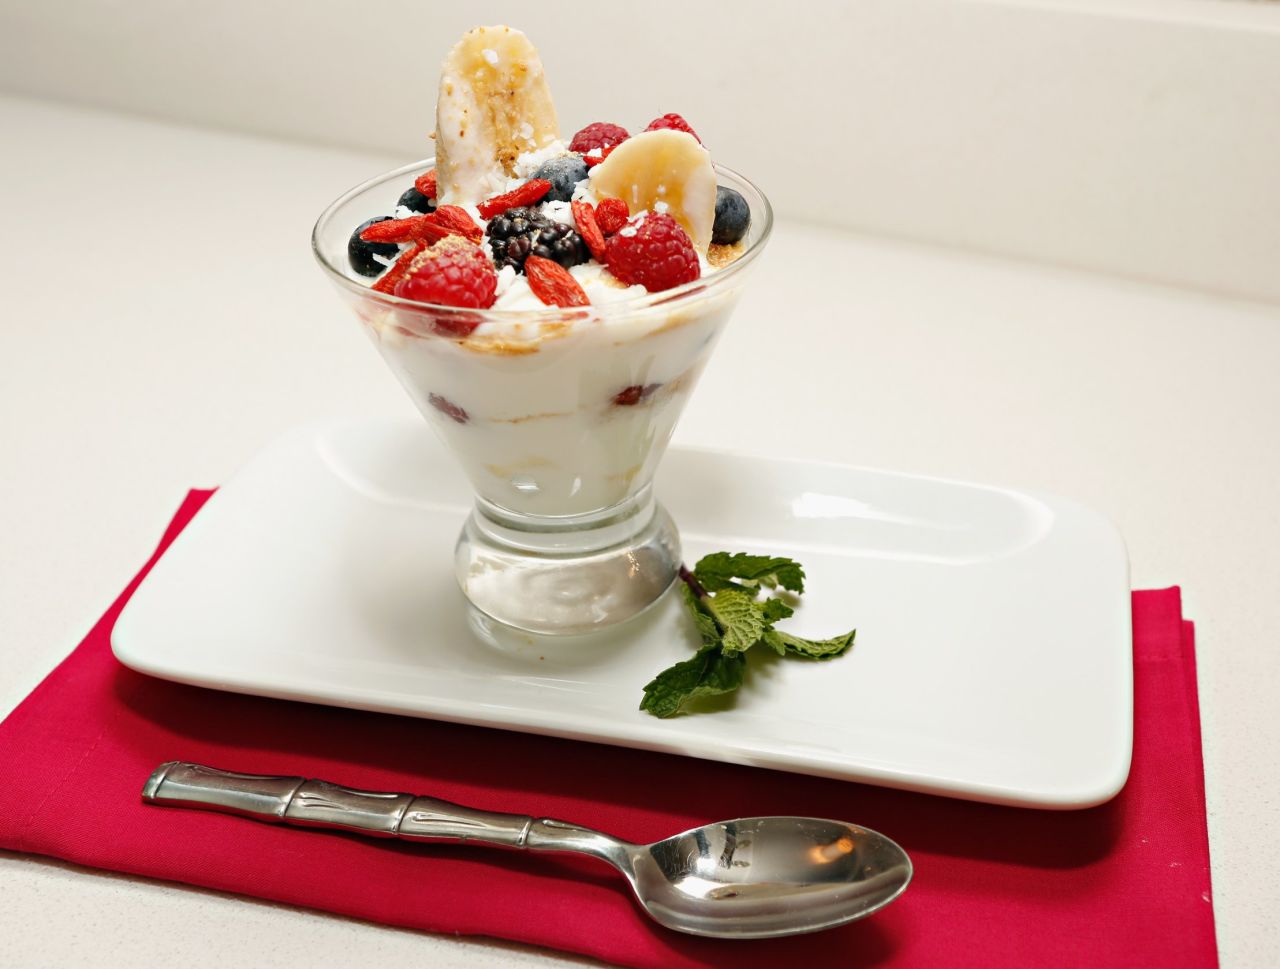 Banana split | The ice cream-based dessert that will transport you to a tropical paradise